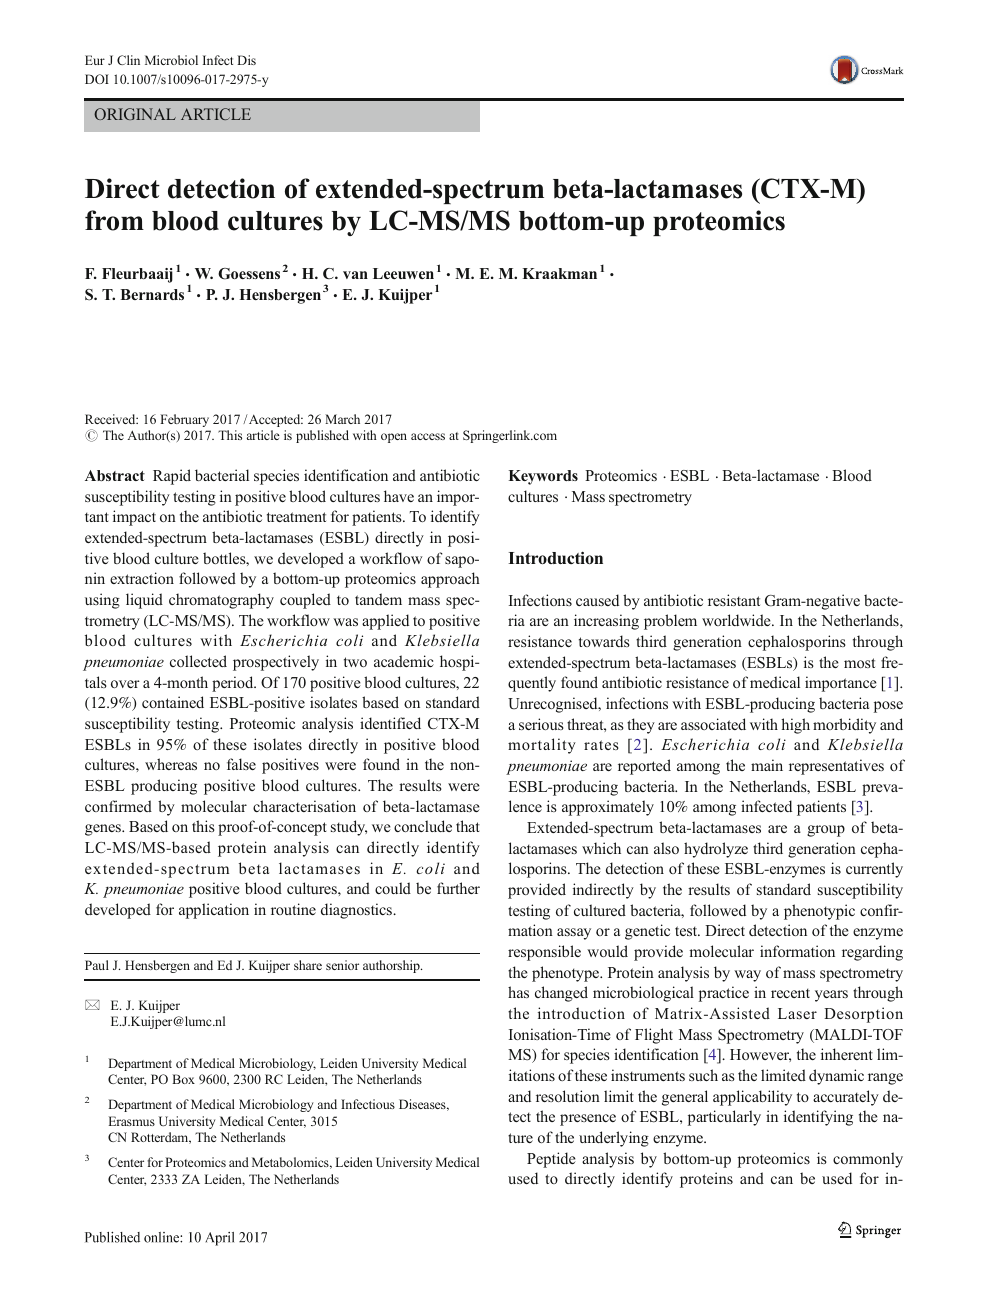 Direct Detection Of Extended Spectrum Beta Lactamases Ctx M From Blood Cultures By Lc Ms Ms Bottom Up Proteomics Topic Of Research Paper In Veterinary Science Download Scholarly Article Pdf And Read For Free On Cyberleninka Open